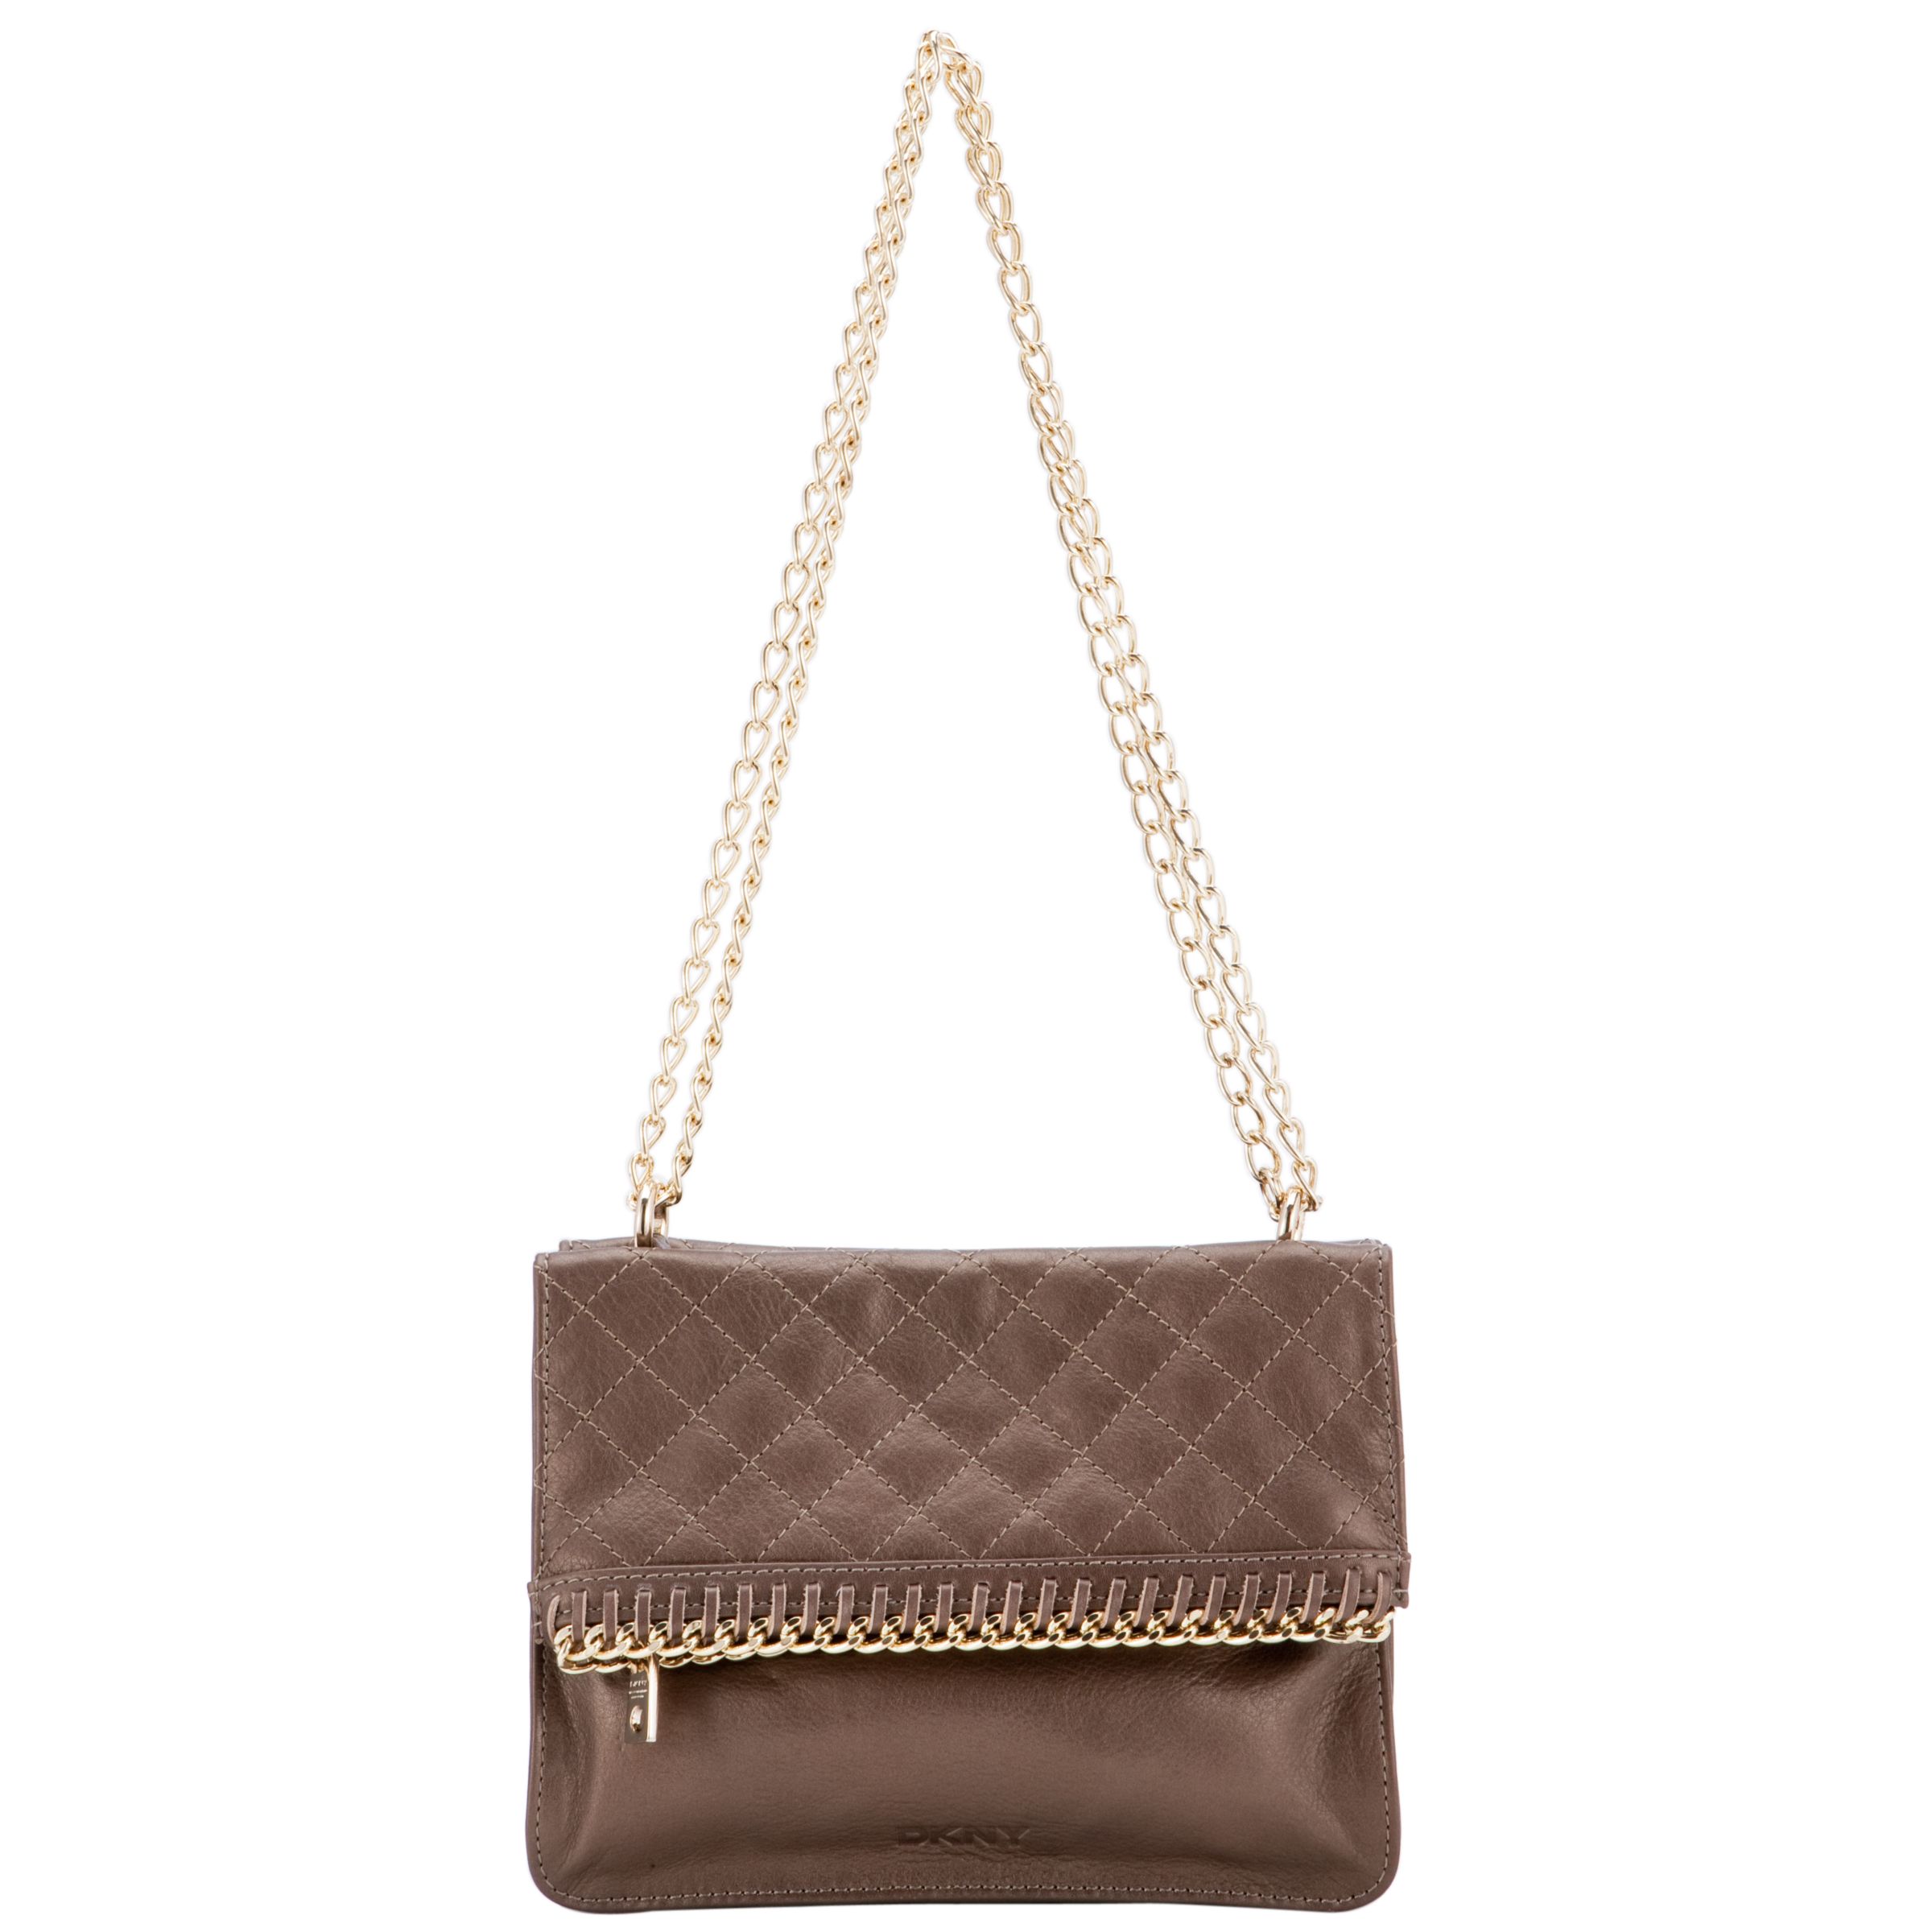 DKNY Quilted Leather Chain Across Body Handbag, Gold at John Lewis